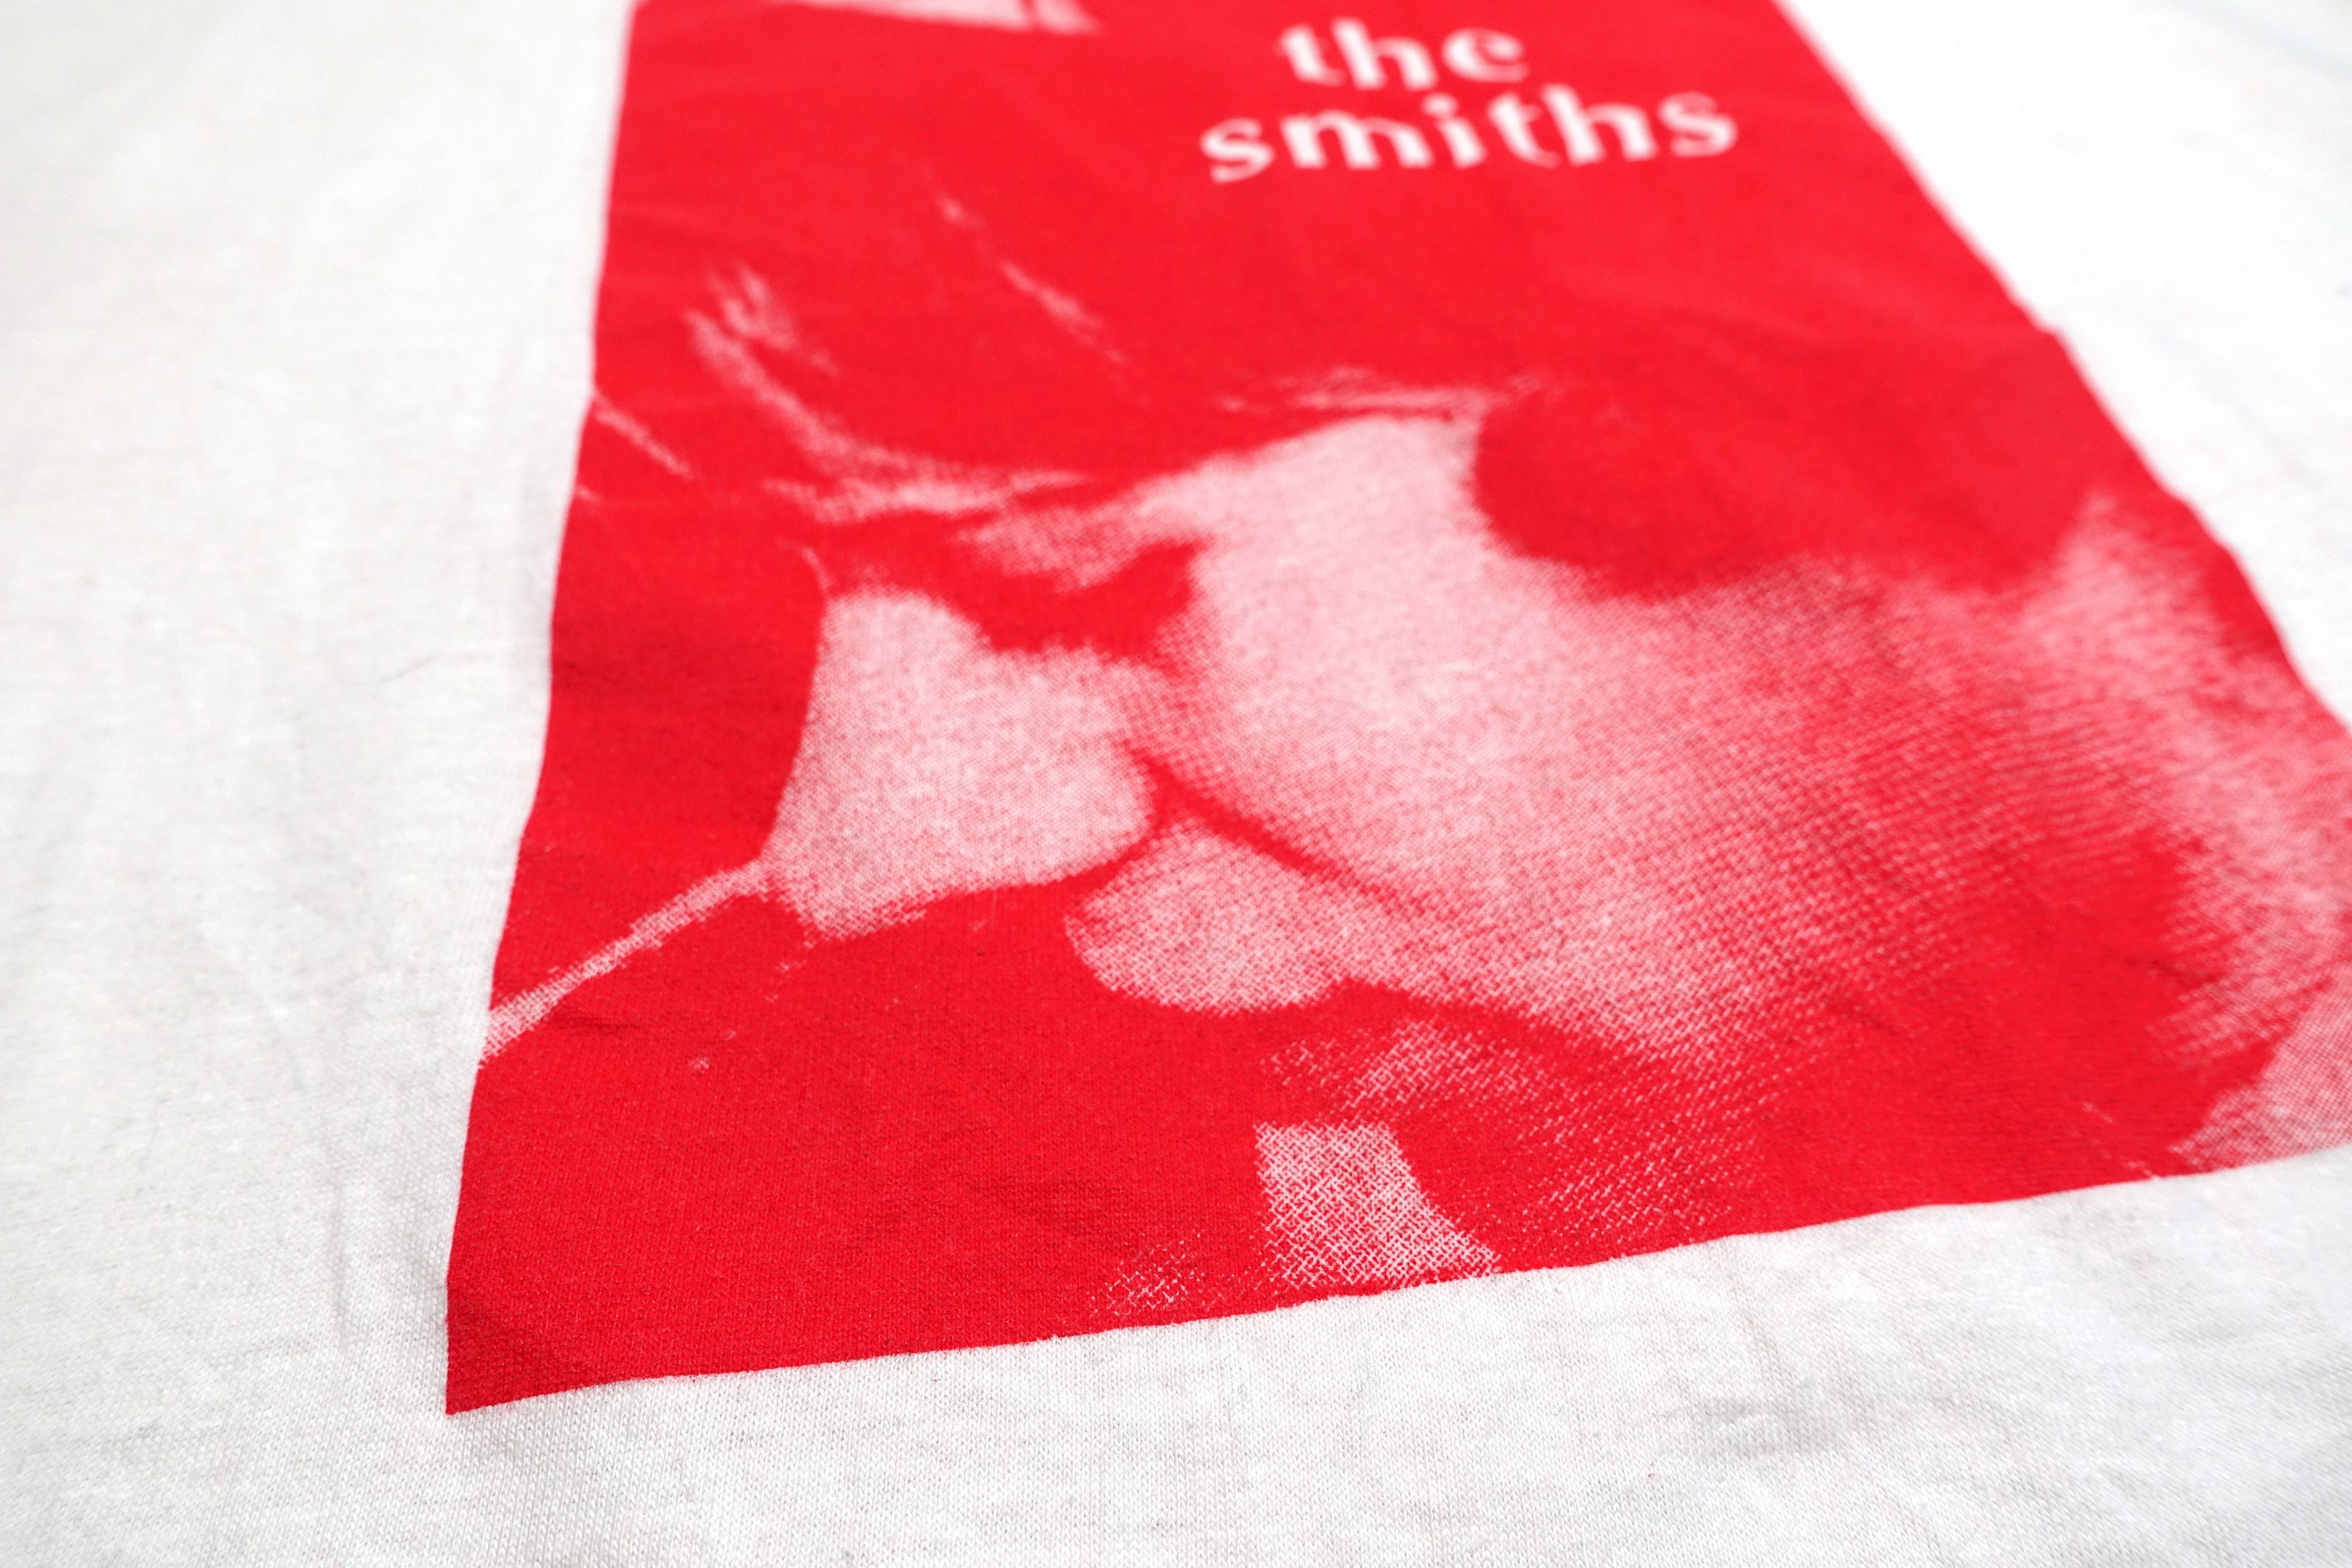 the Smiths - Hand In Glove Shirt (Bootleg by Me) Size Large